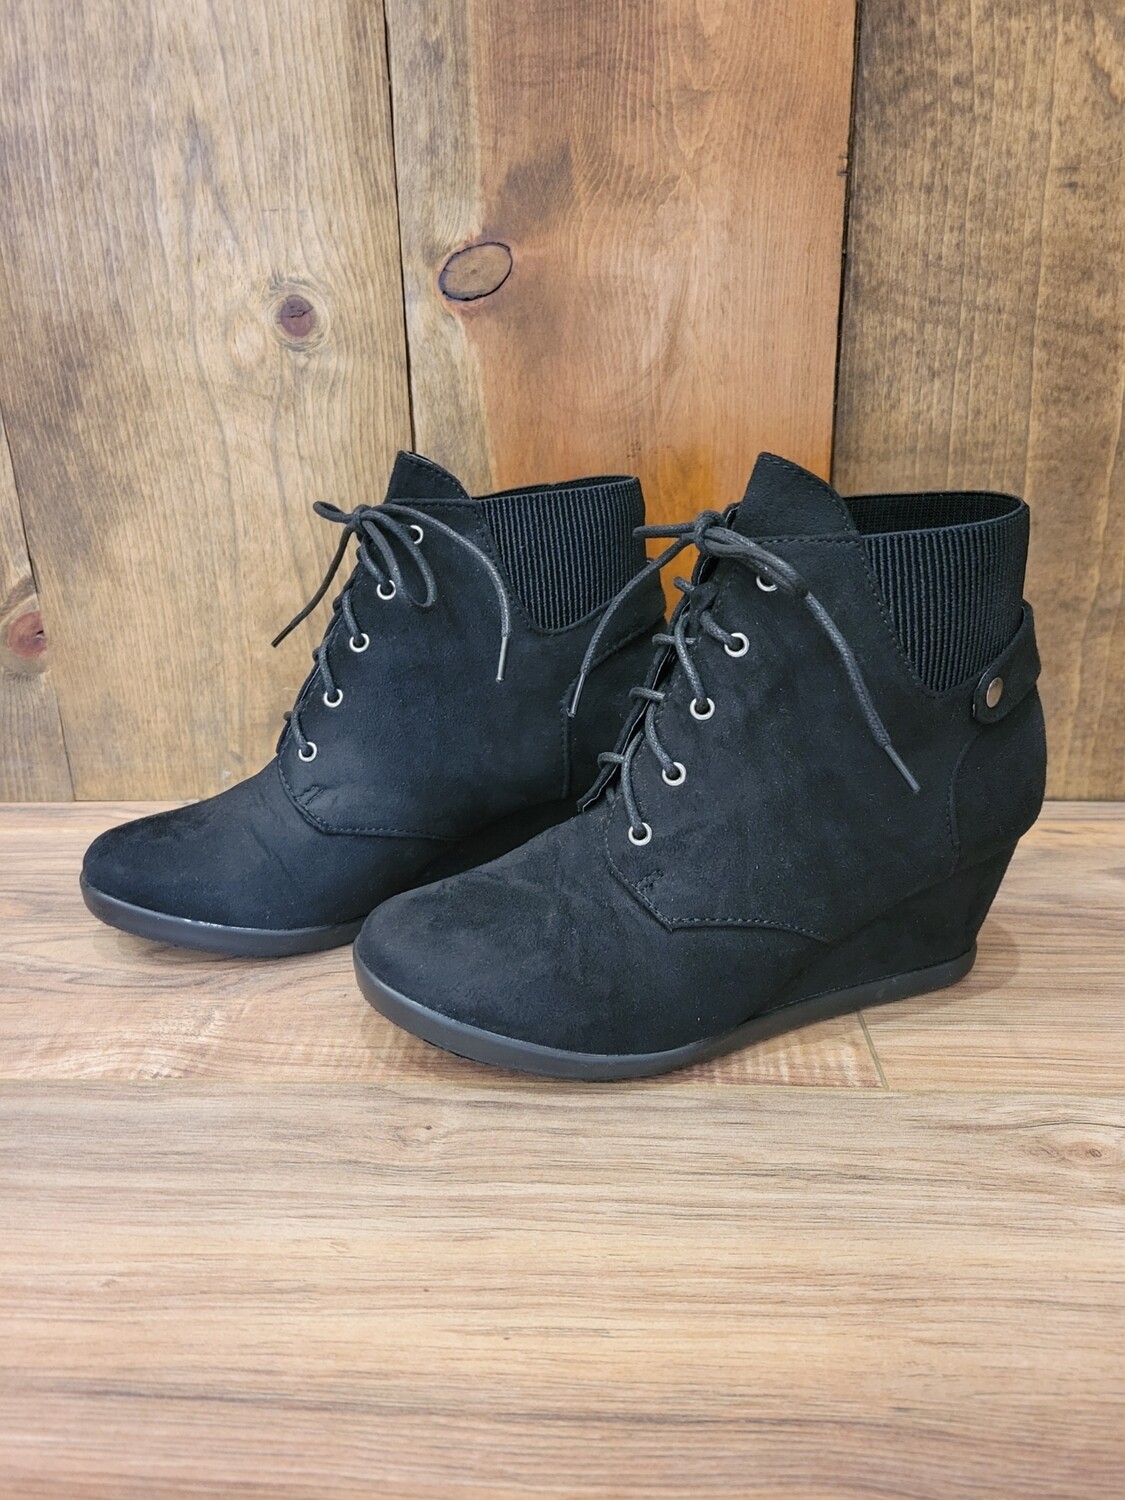 The Betsy Wedge Bootie